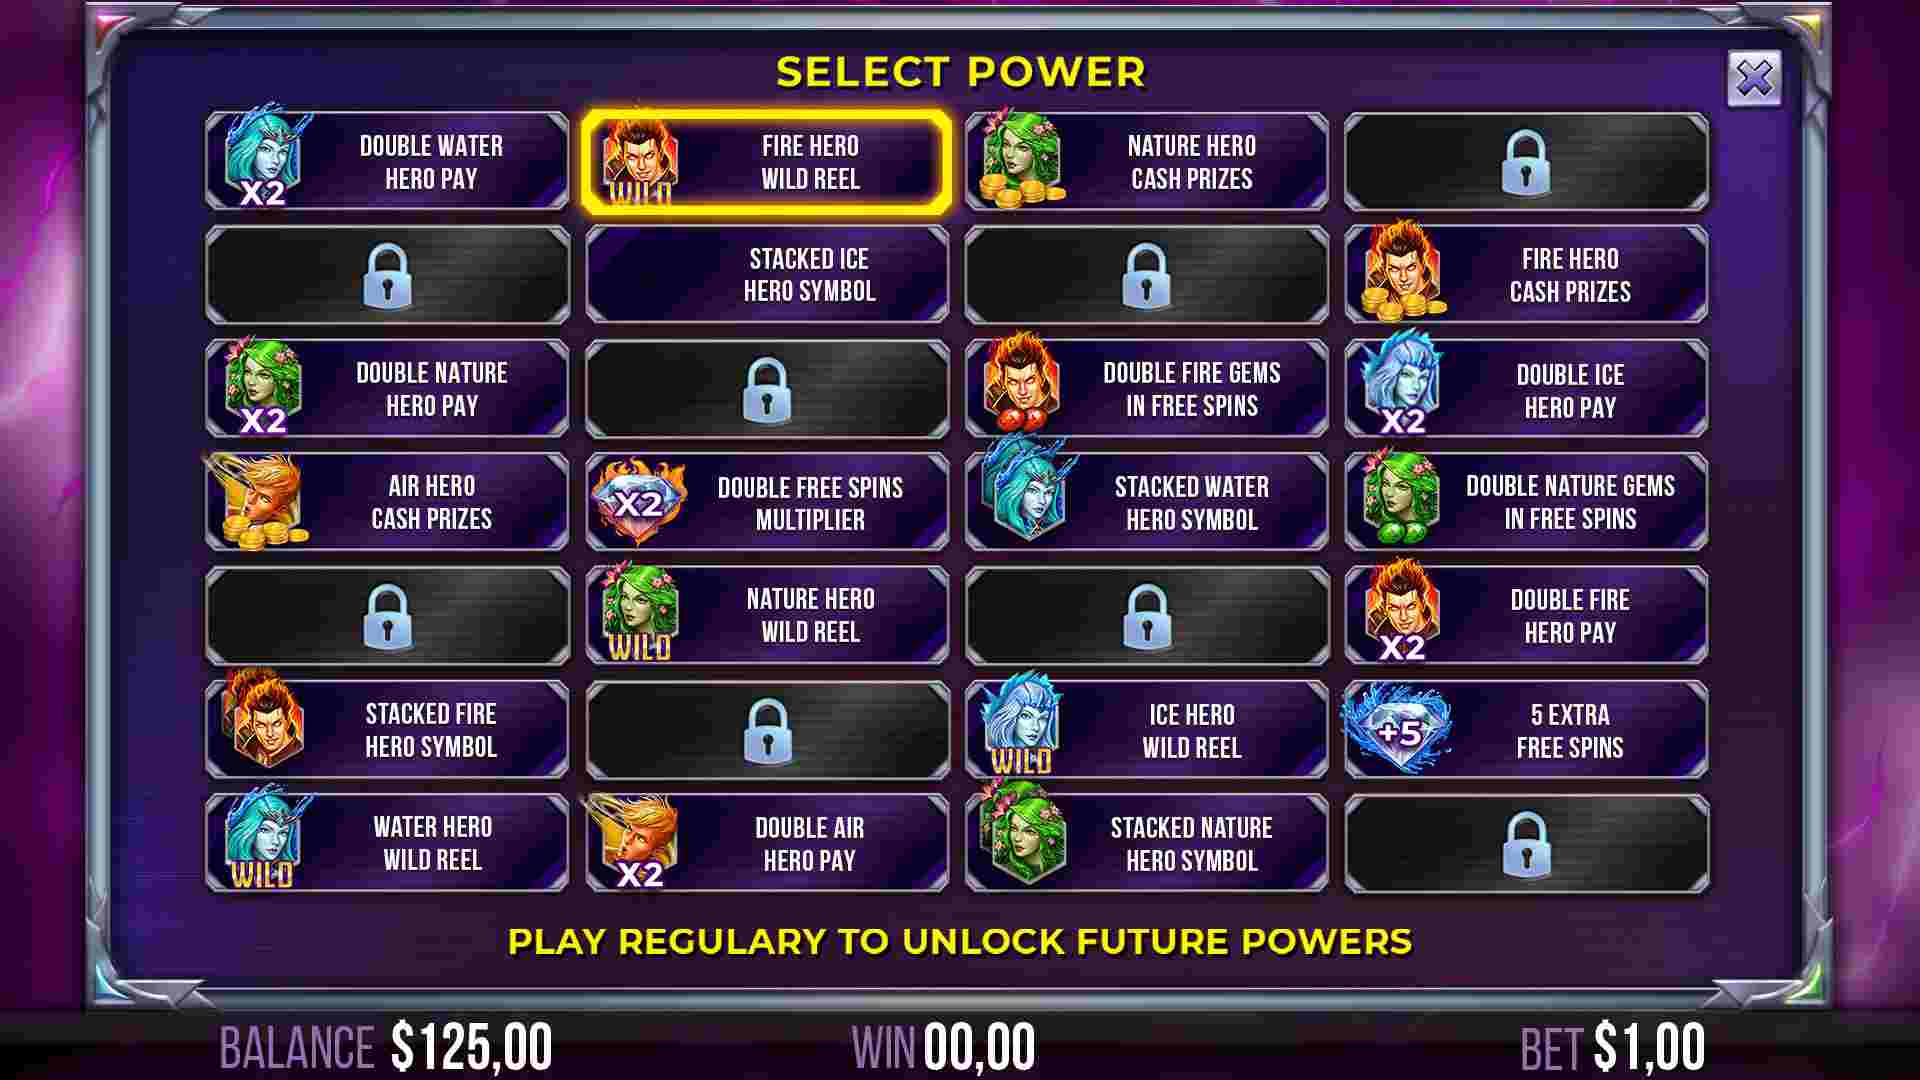 7 Elements Future Powers Feature